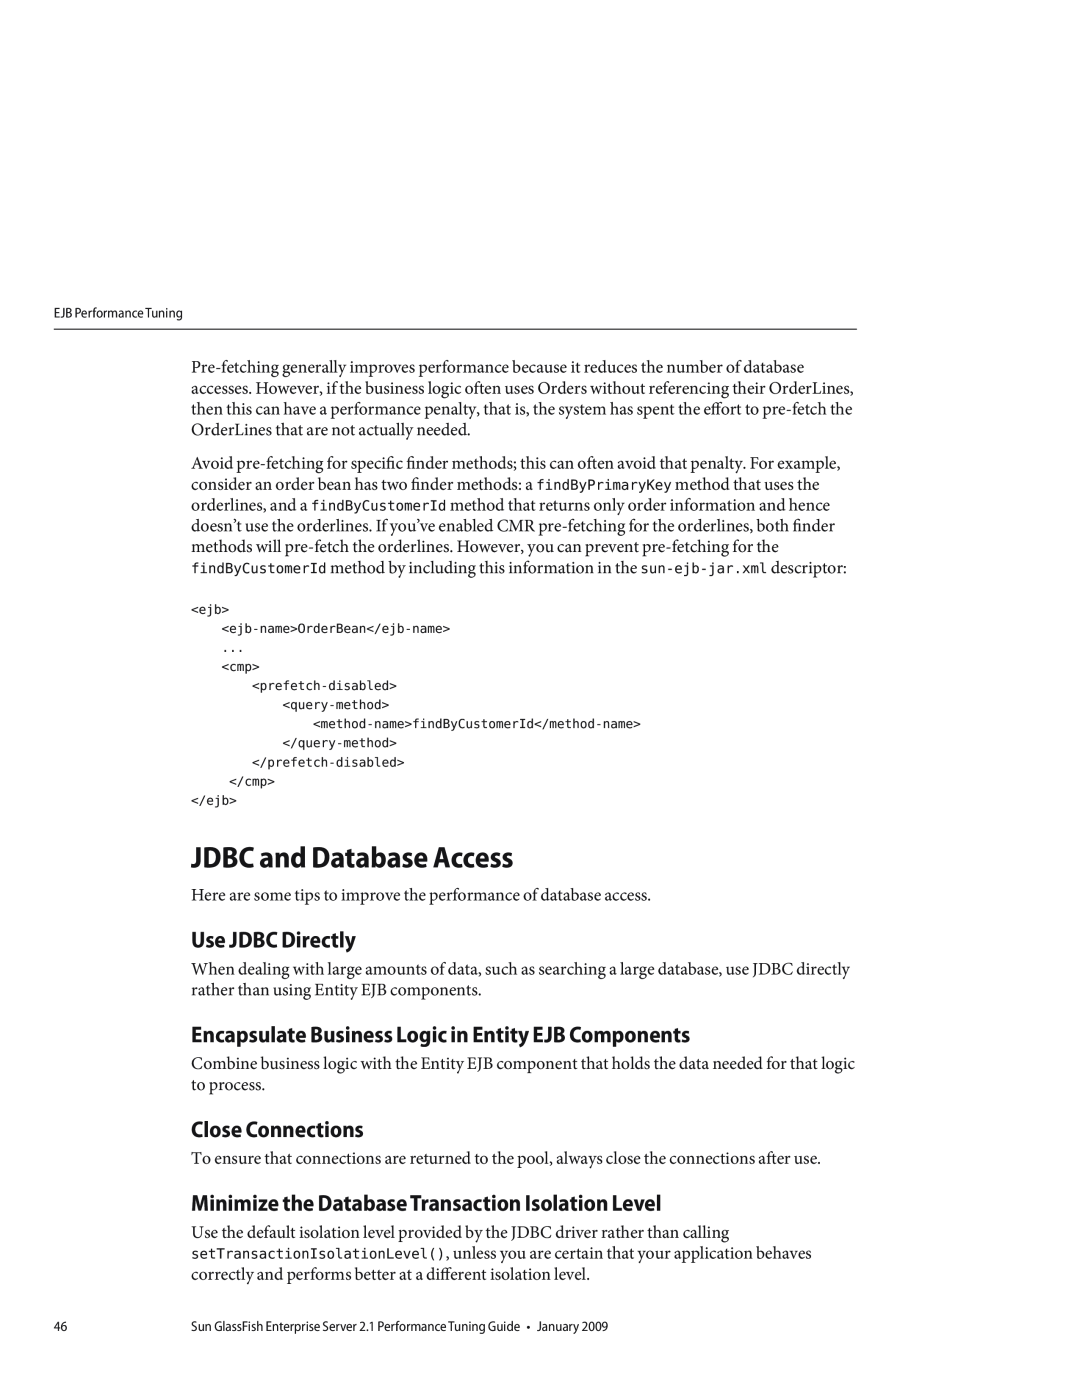 Sun Microsystems 820434310 manual JDBC and Database Access, Use JDBC Directly, Close Connections 